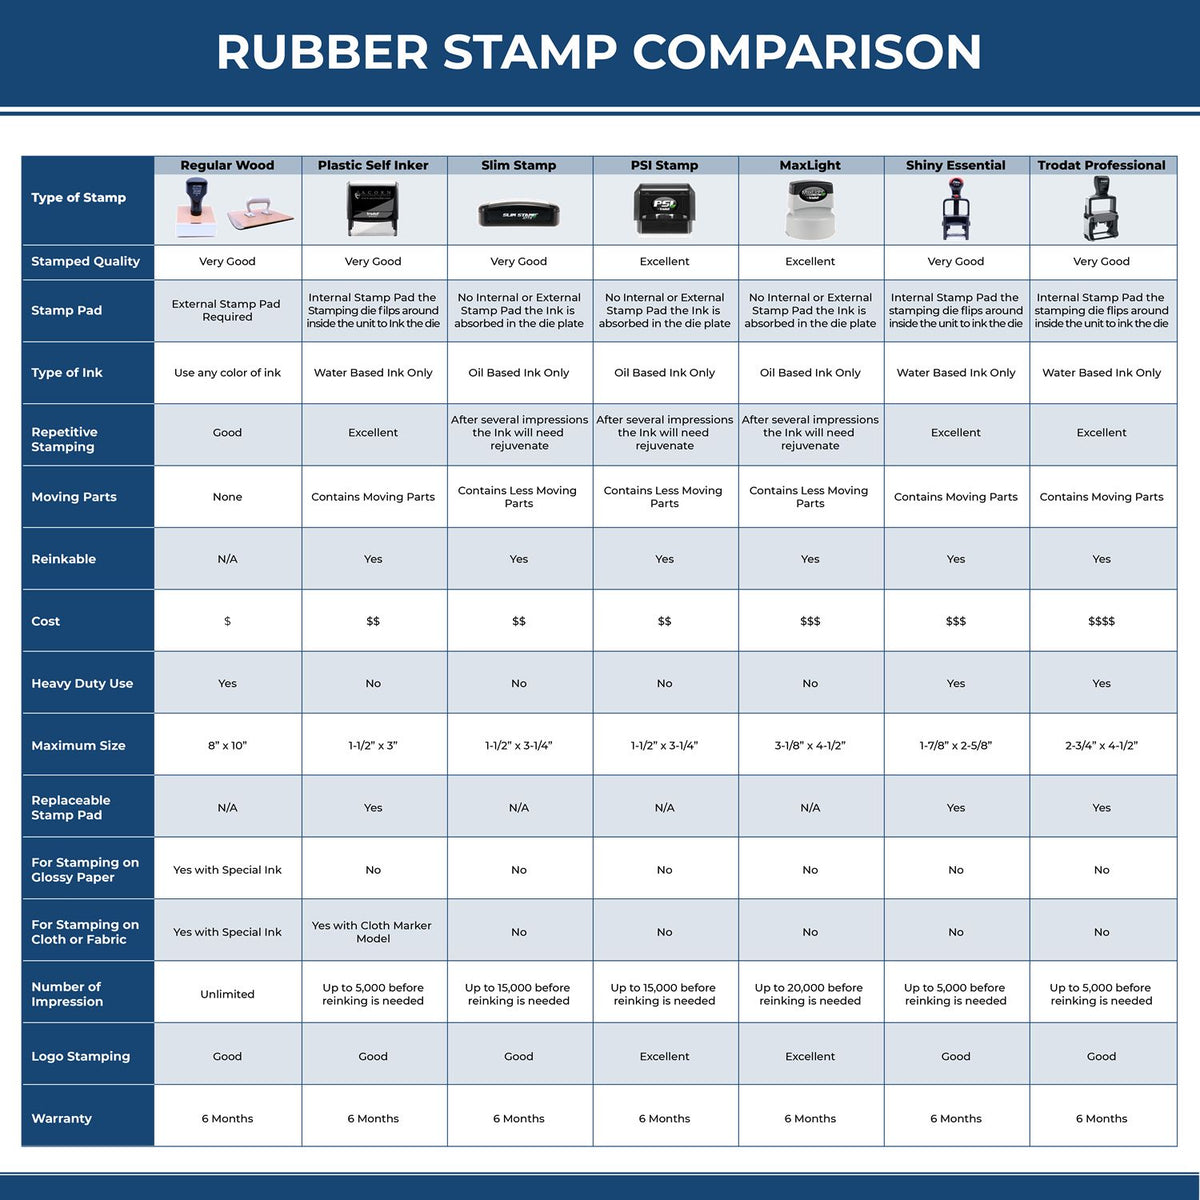 Authorizations Revoked Rubber Stamp 4243R Rubber Stamp Comparison